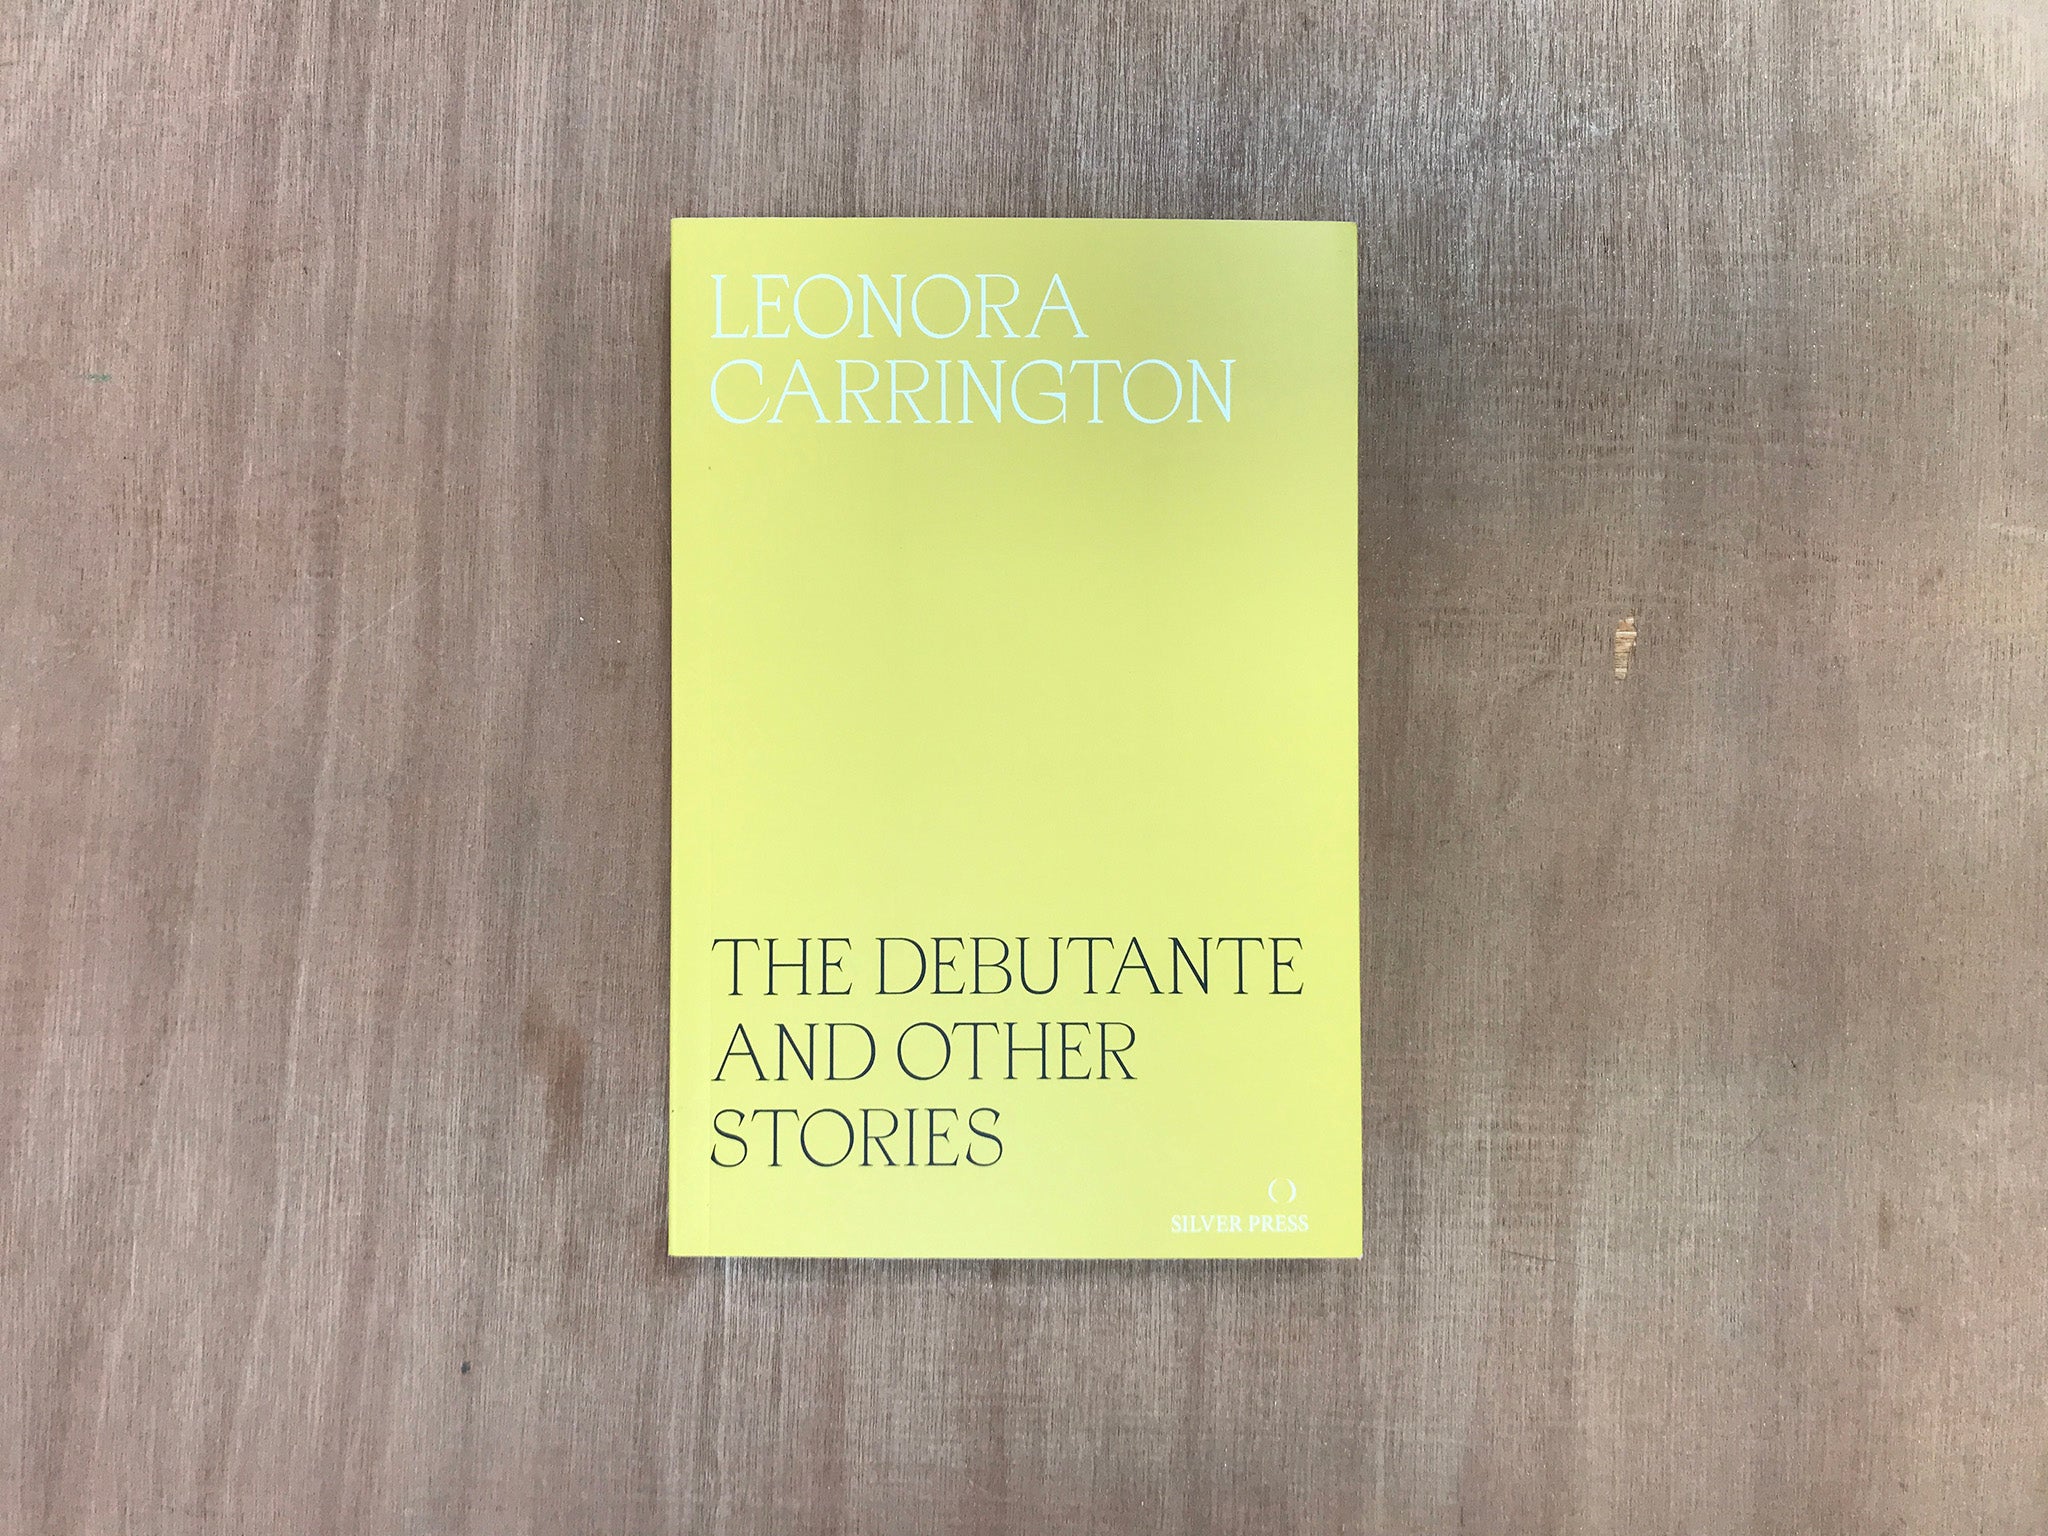 THE DEBUTANTE AND OTHER STORIES by Leonora Carrington